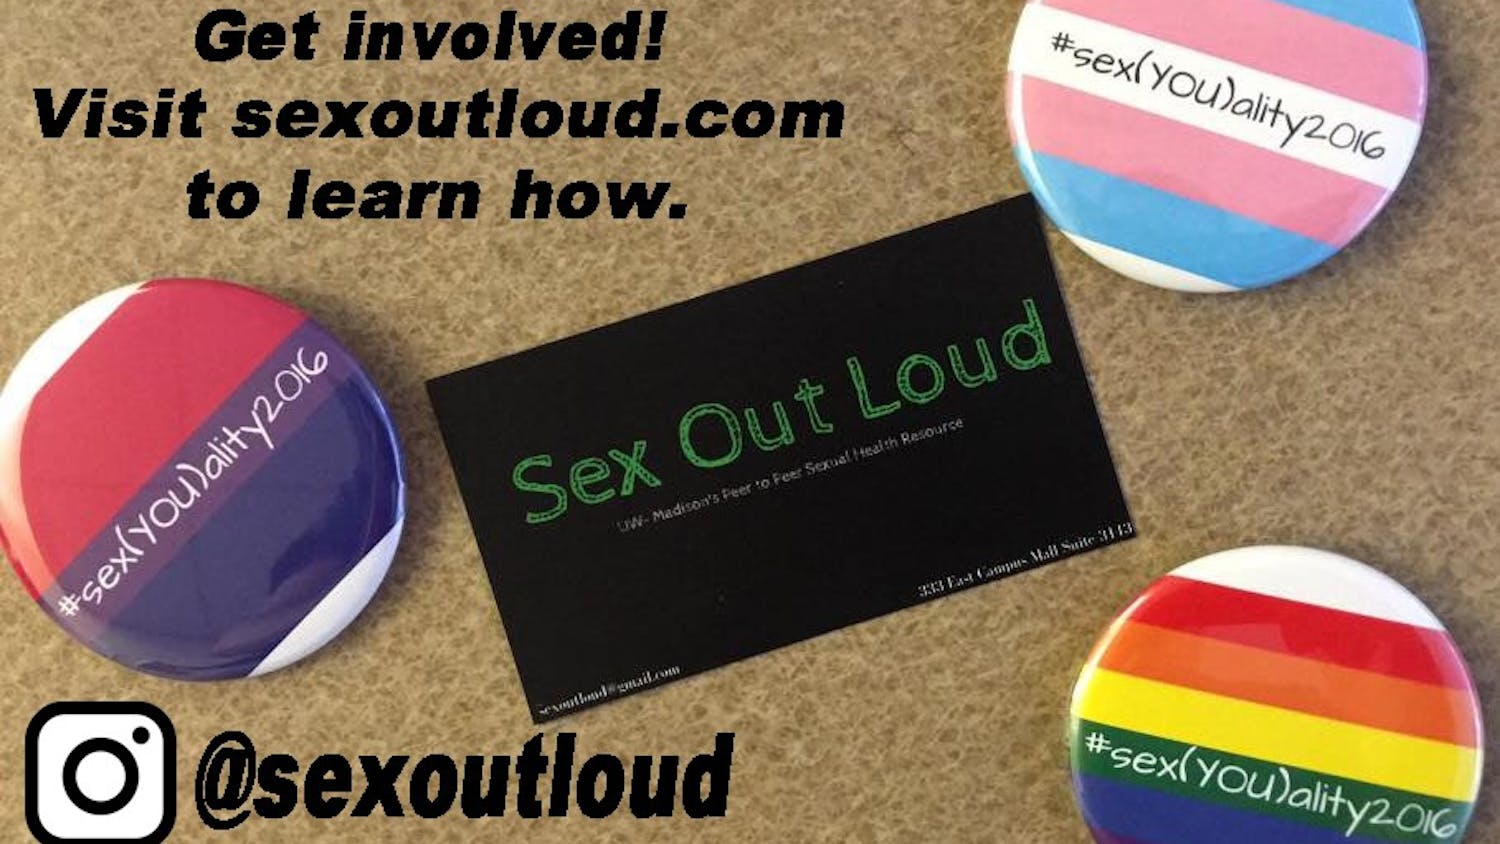 Sex Out Loud offers tons of opportunities for UW students to get involved and help spread the word about having safe sex.